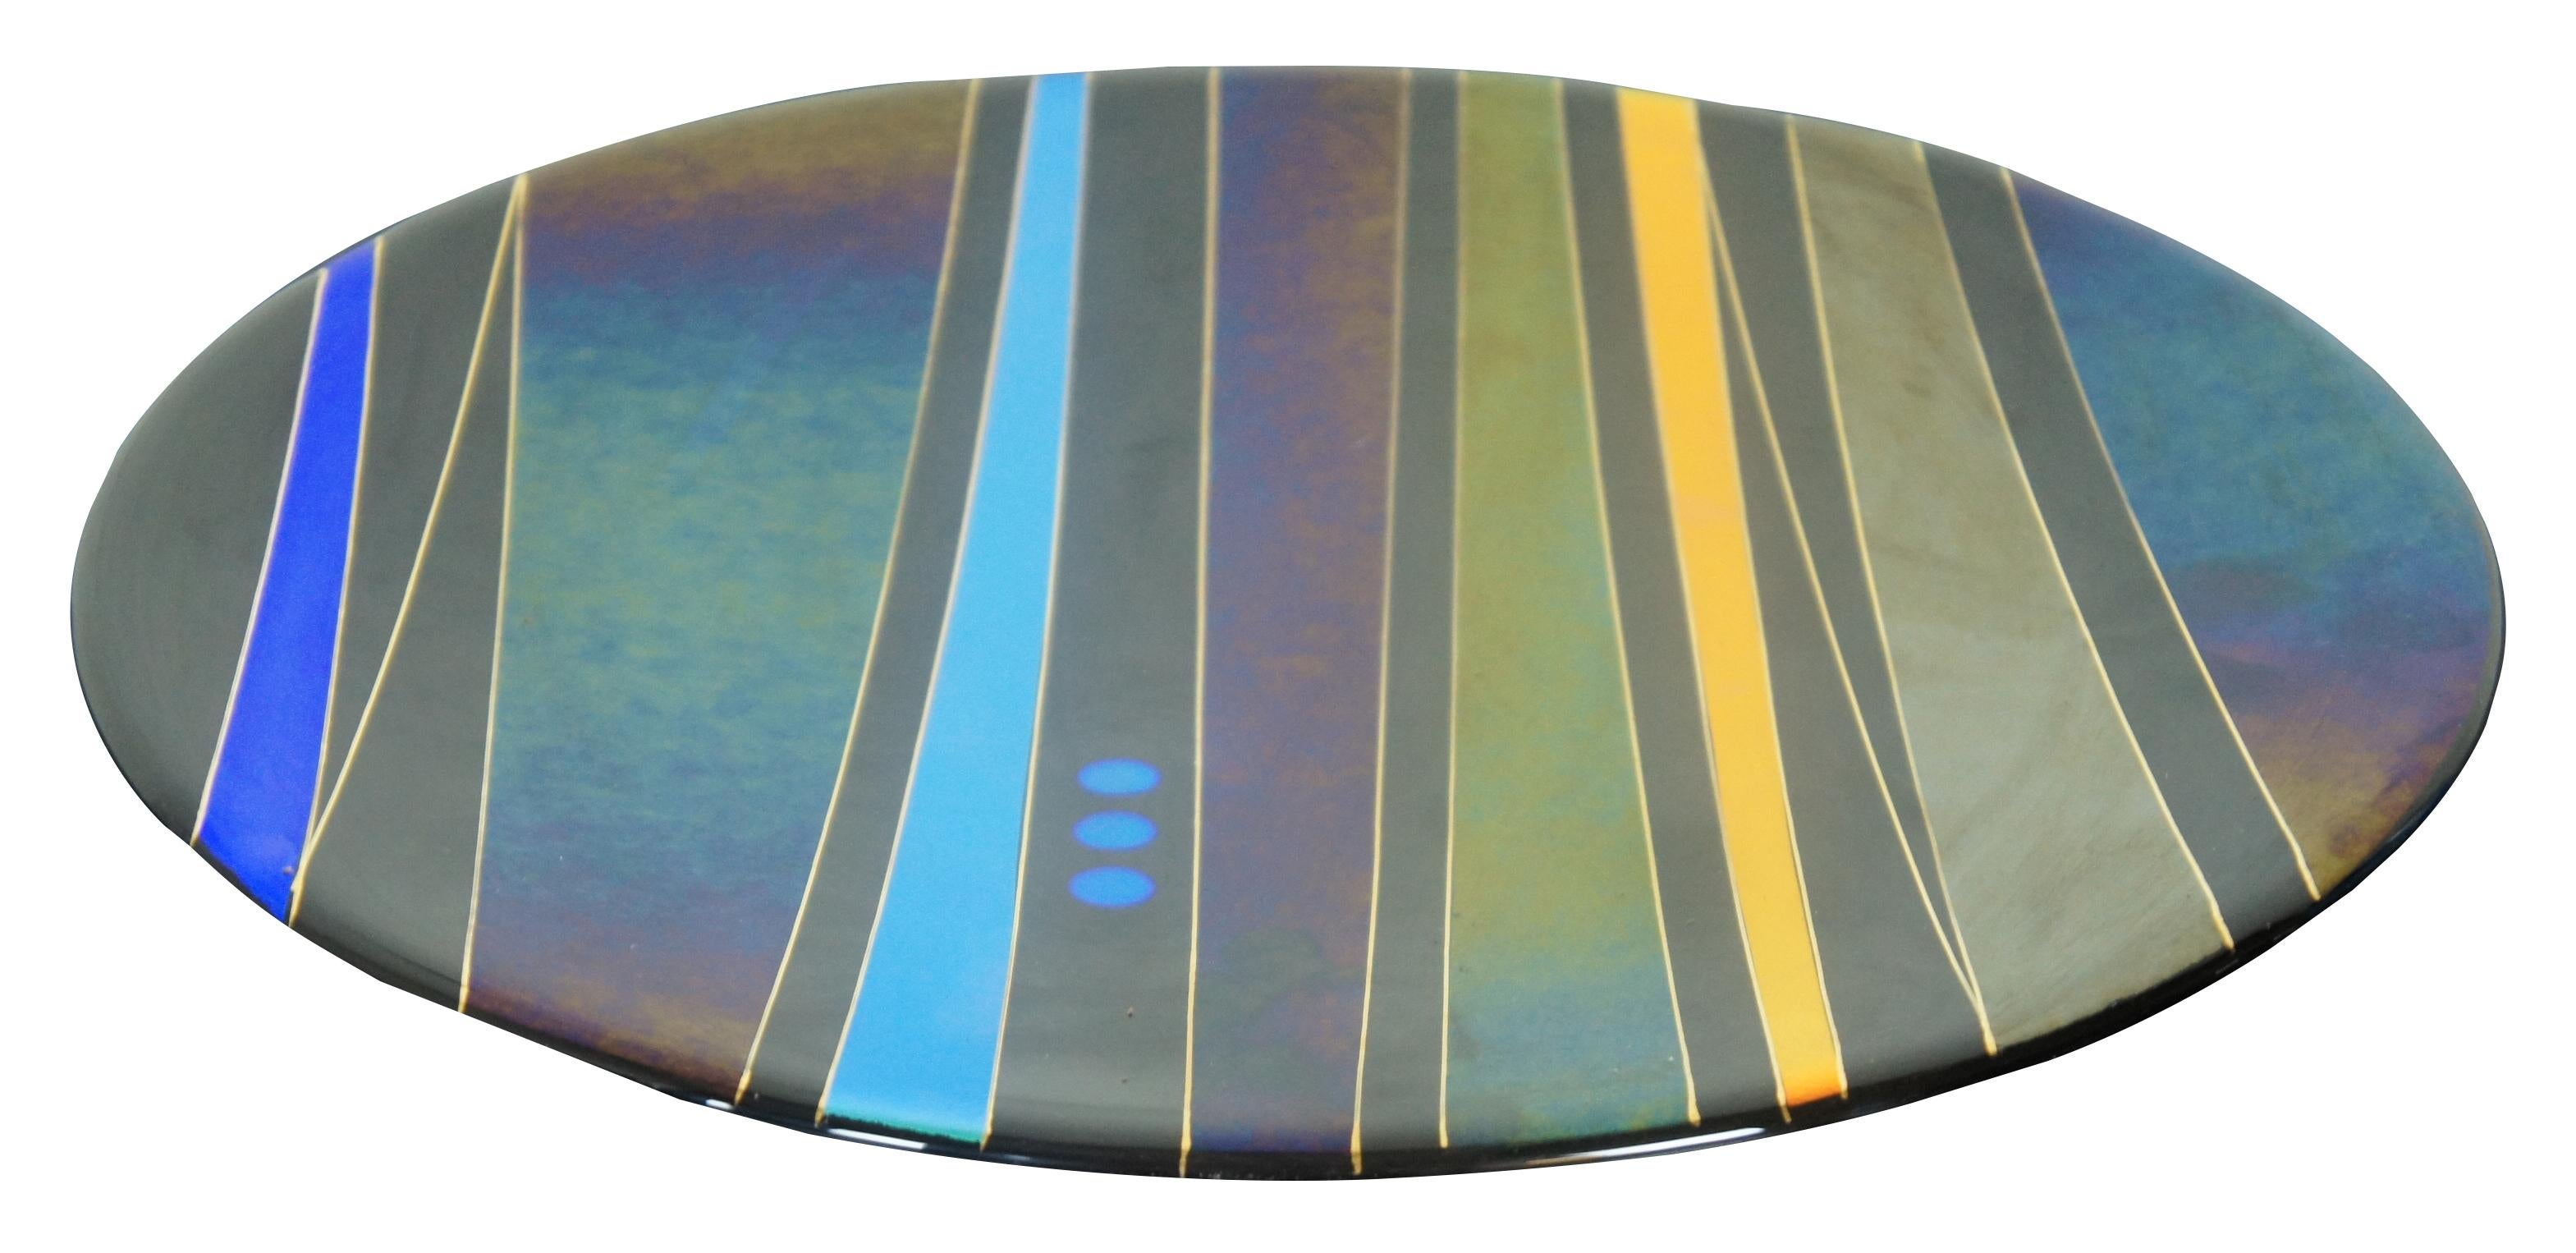 Beautiful Modernist abstract geometric studio art glass plate or charger featuring striped of bold, iridescent colors and gold trim. Made by Jim & Sharon Barrett of Barrett Glass Studios in Memphis, Tennessee.